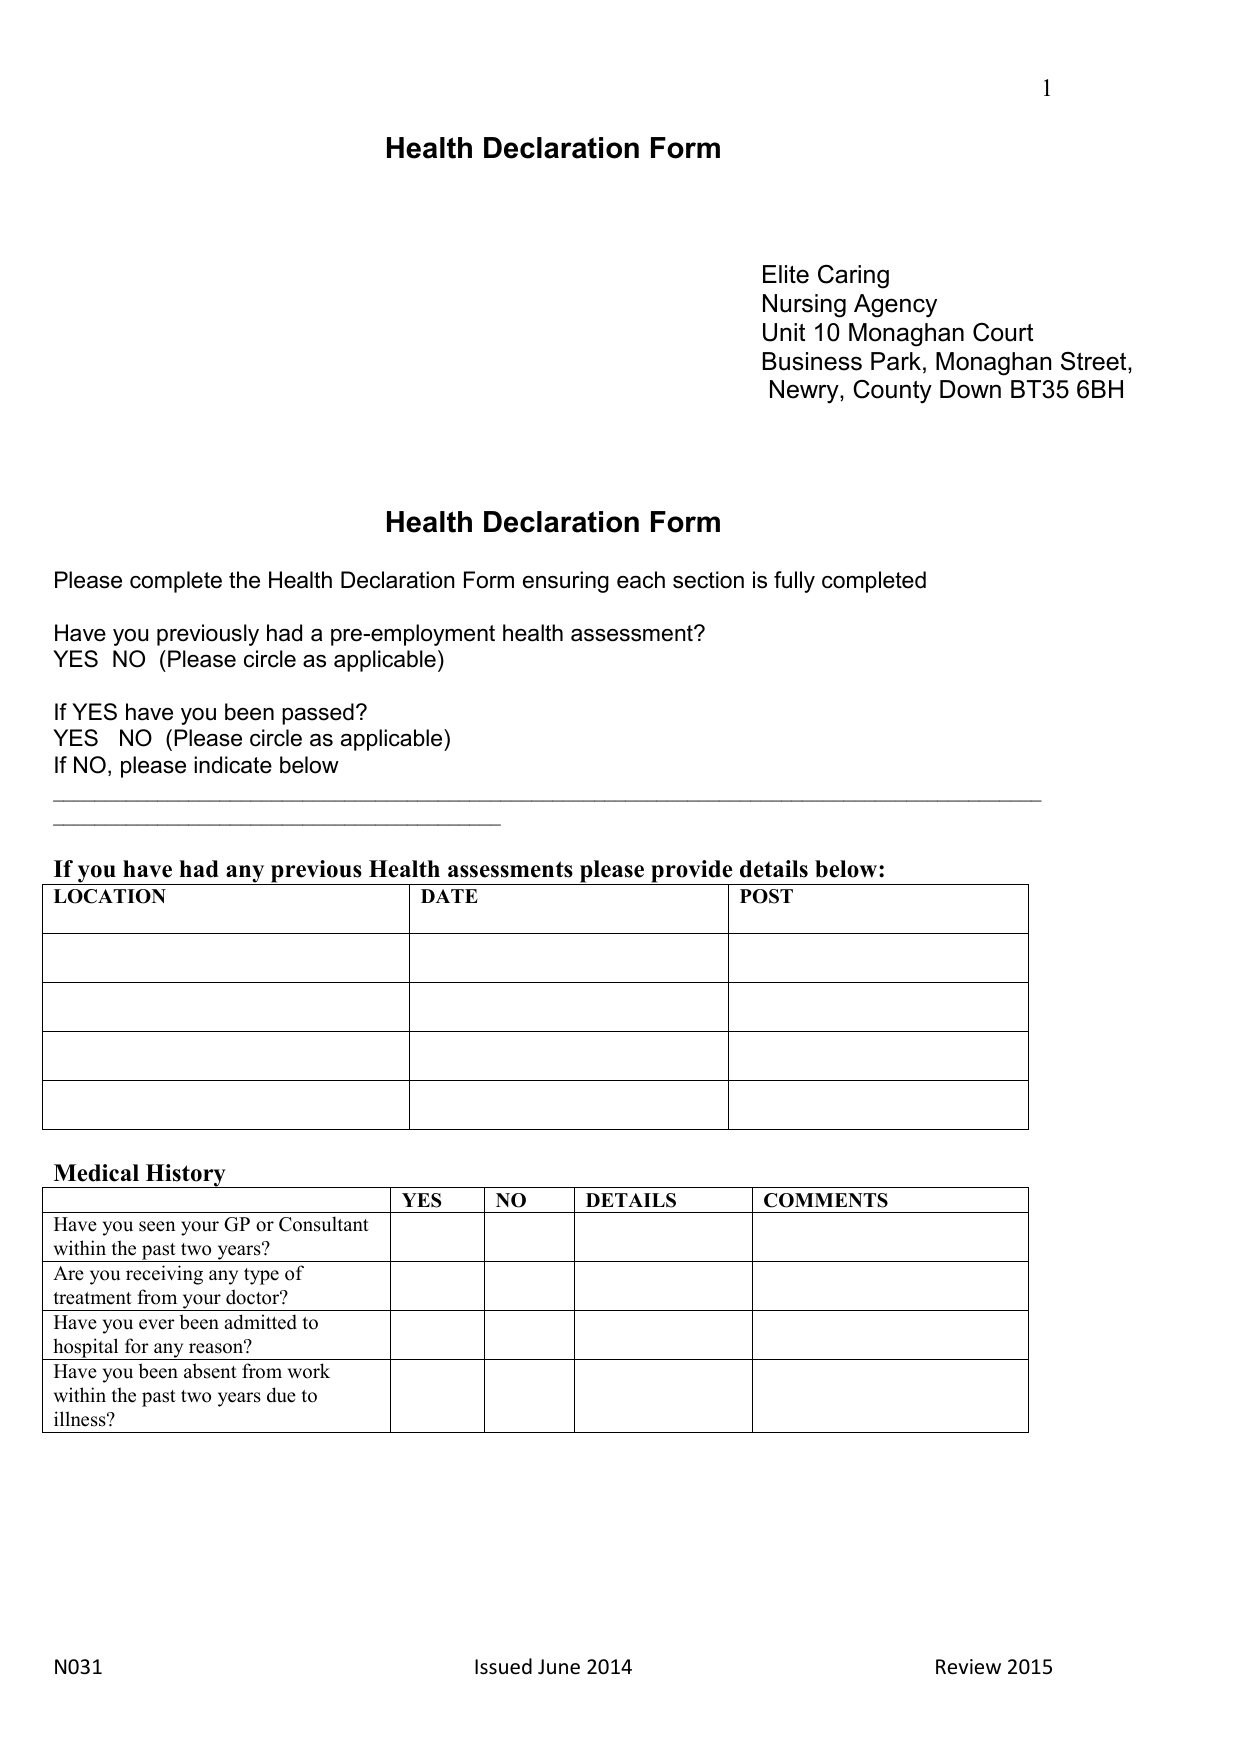 Travel Health Declaration Form FREE 7 Travel History Forms In PDF